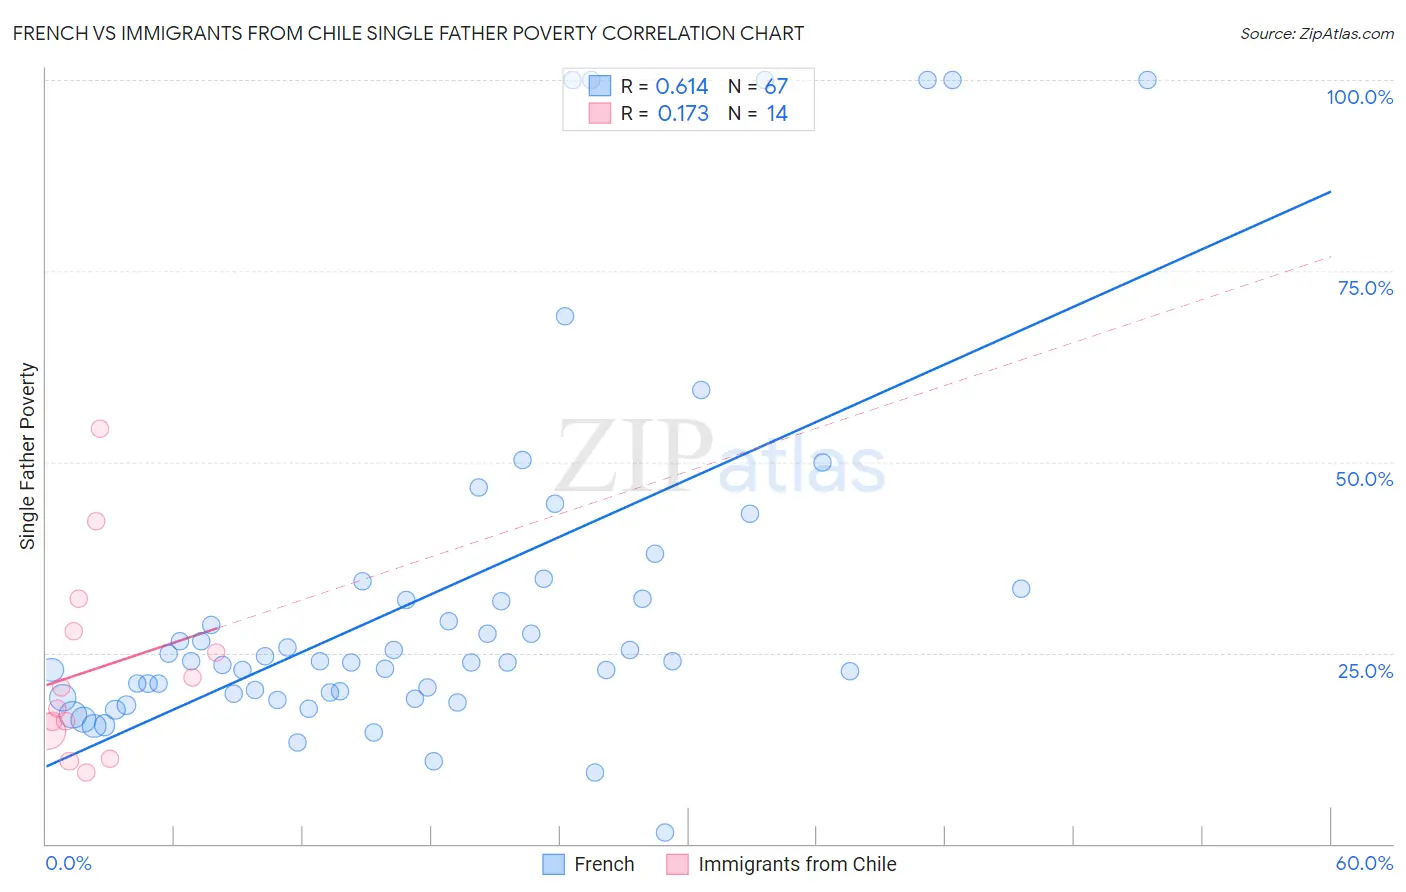 French vs Immigrants from Chile Single Father Poverty